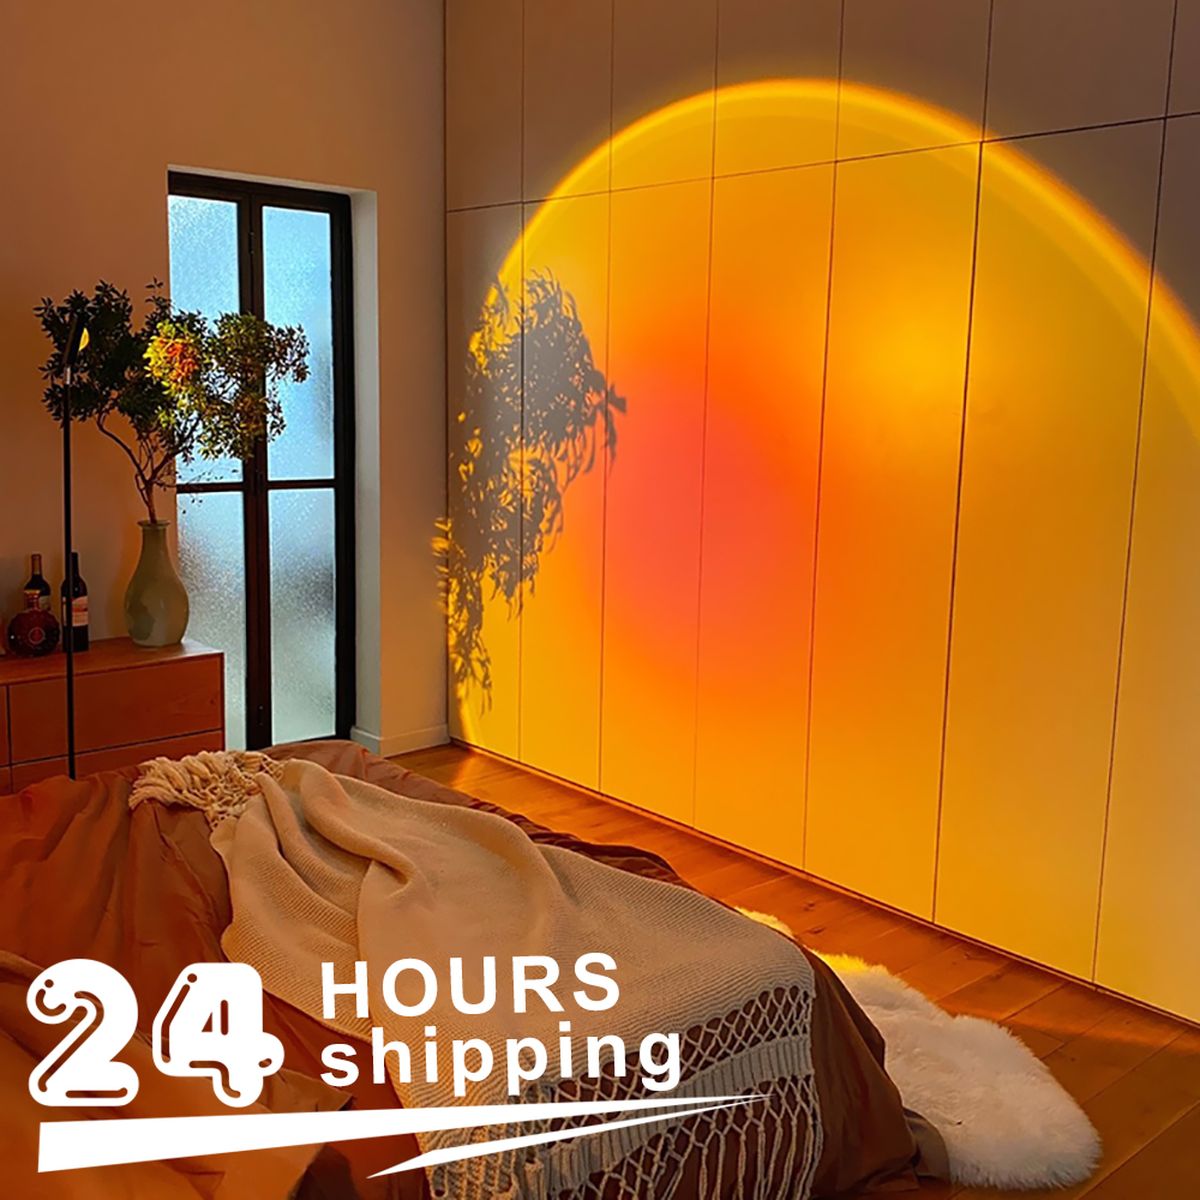 Led Night Light Sunset Lamp Projector For Background Wall Bedroom Decorative Table Lamp Desk Rainbow Sunset Projection Lamps